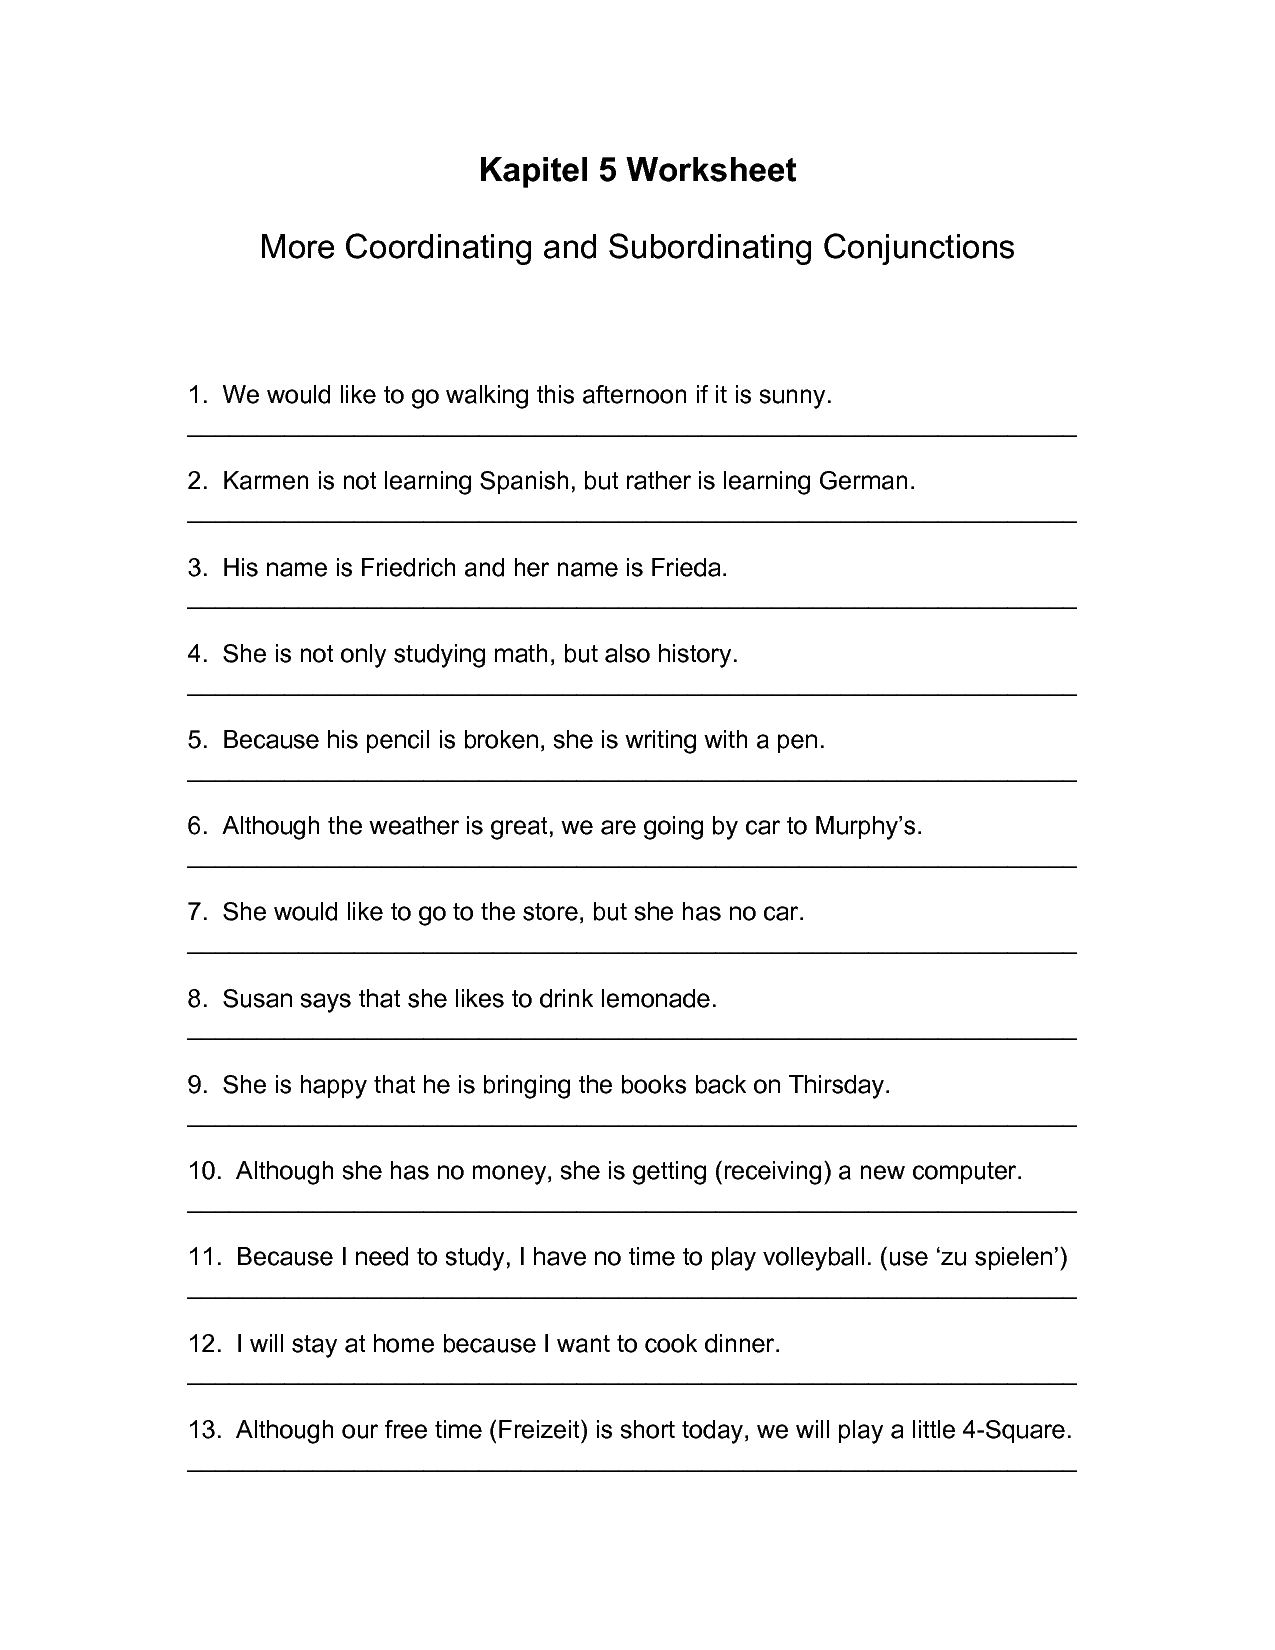 15 Best Images Of Worksheets Using Conjunctions Subordinating Conjunctions Worksheets